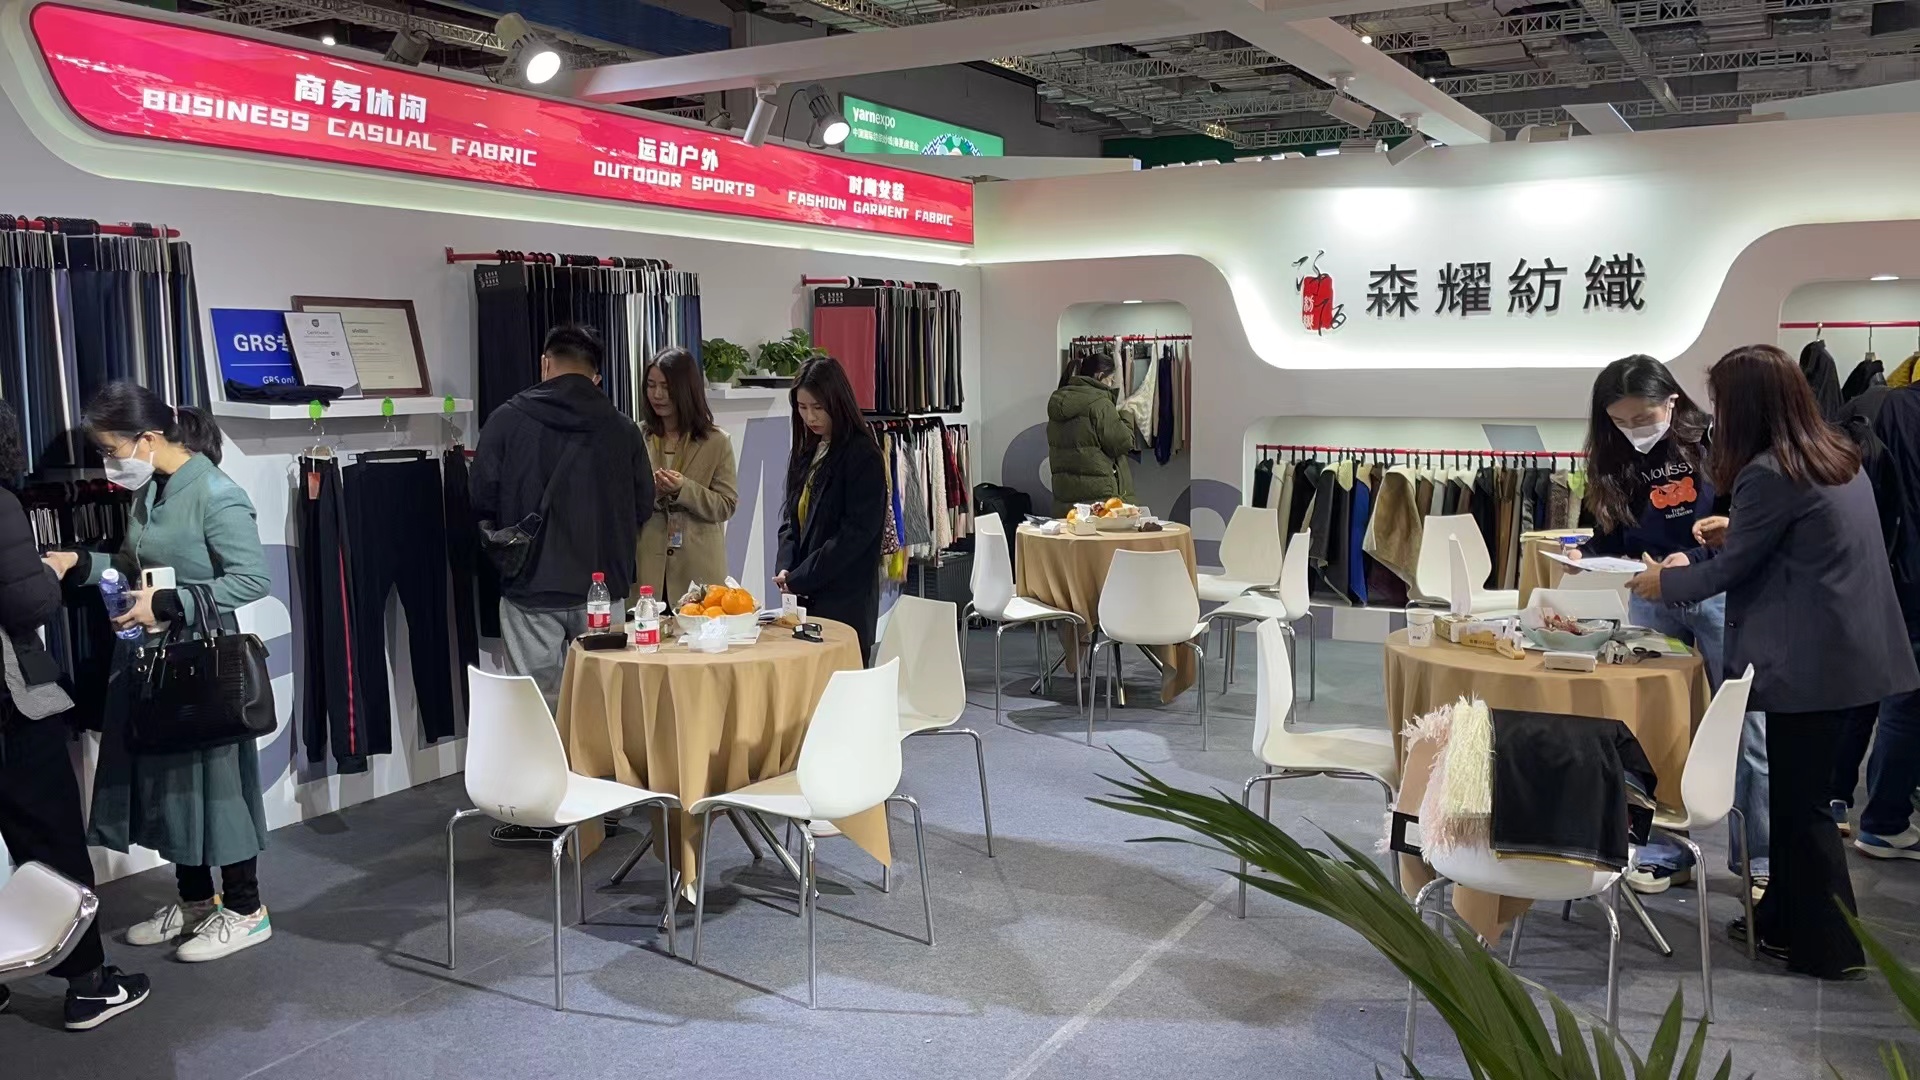 intertextile fair in shanghai   NO：8.1 G83，  welcome for your coming 